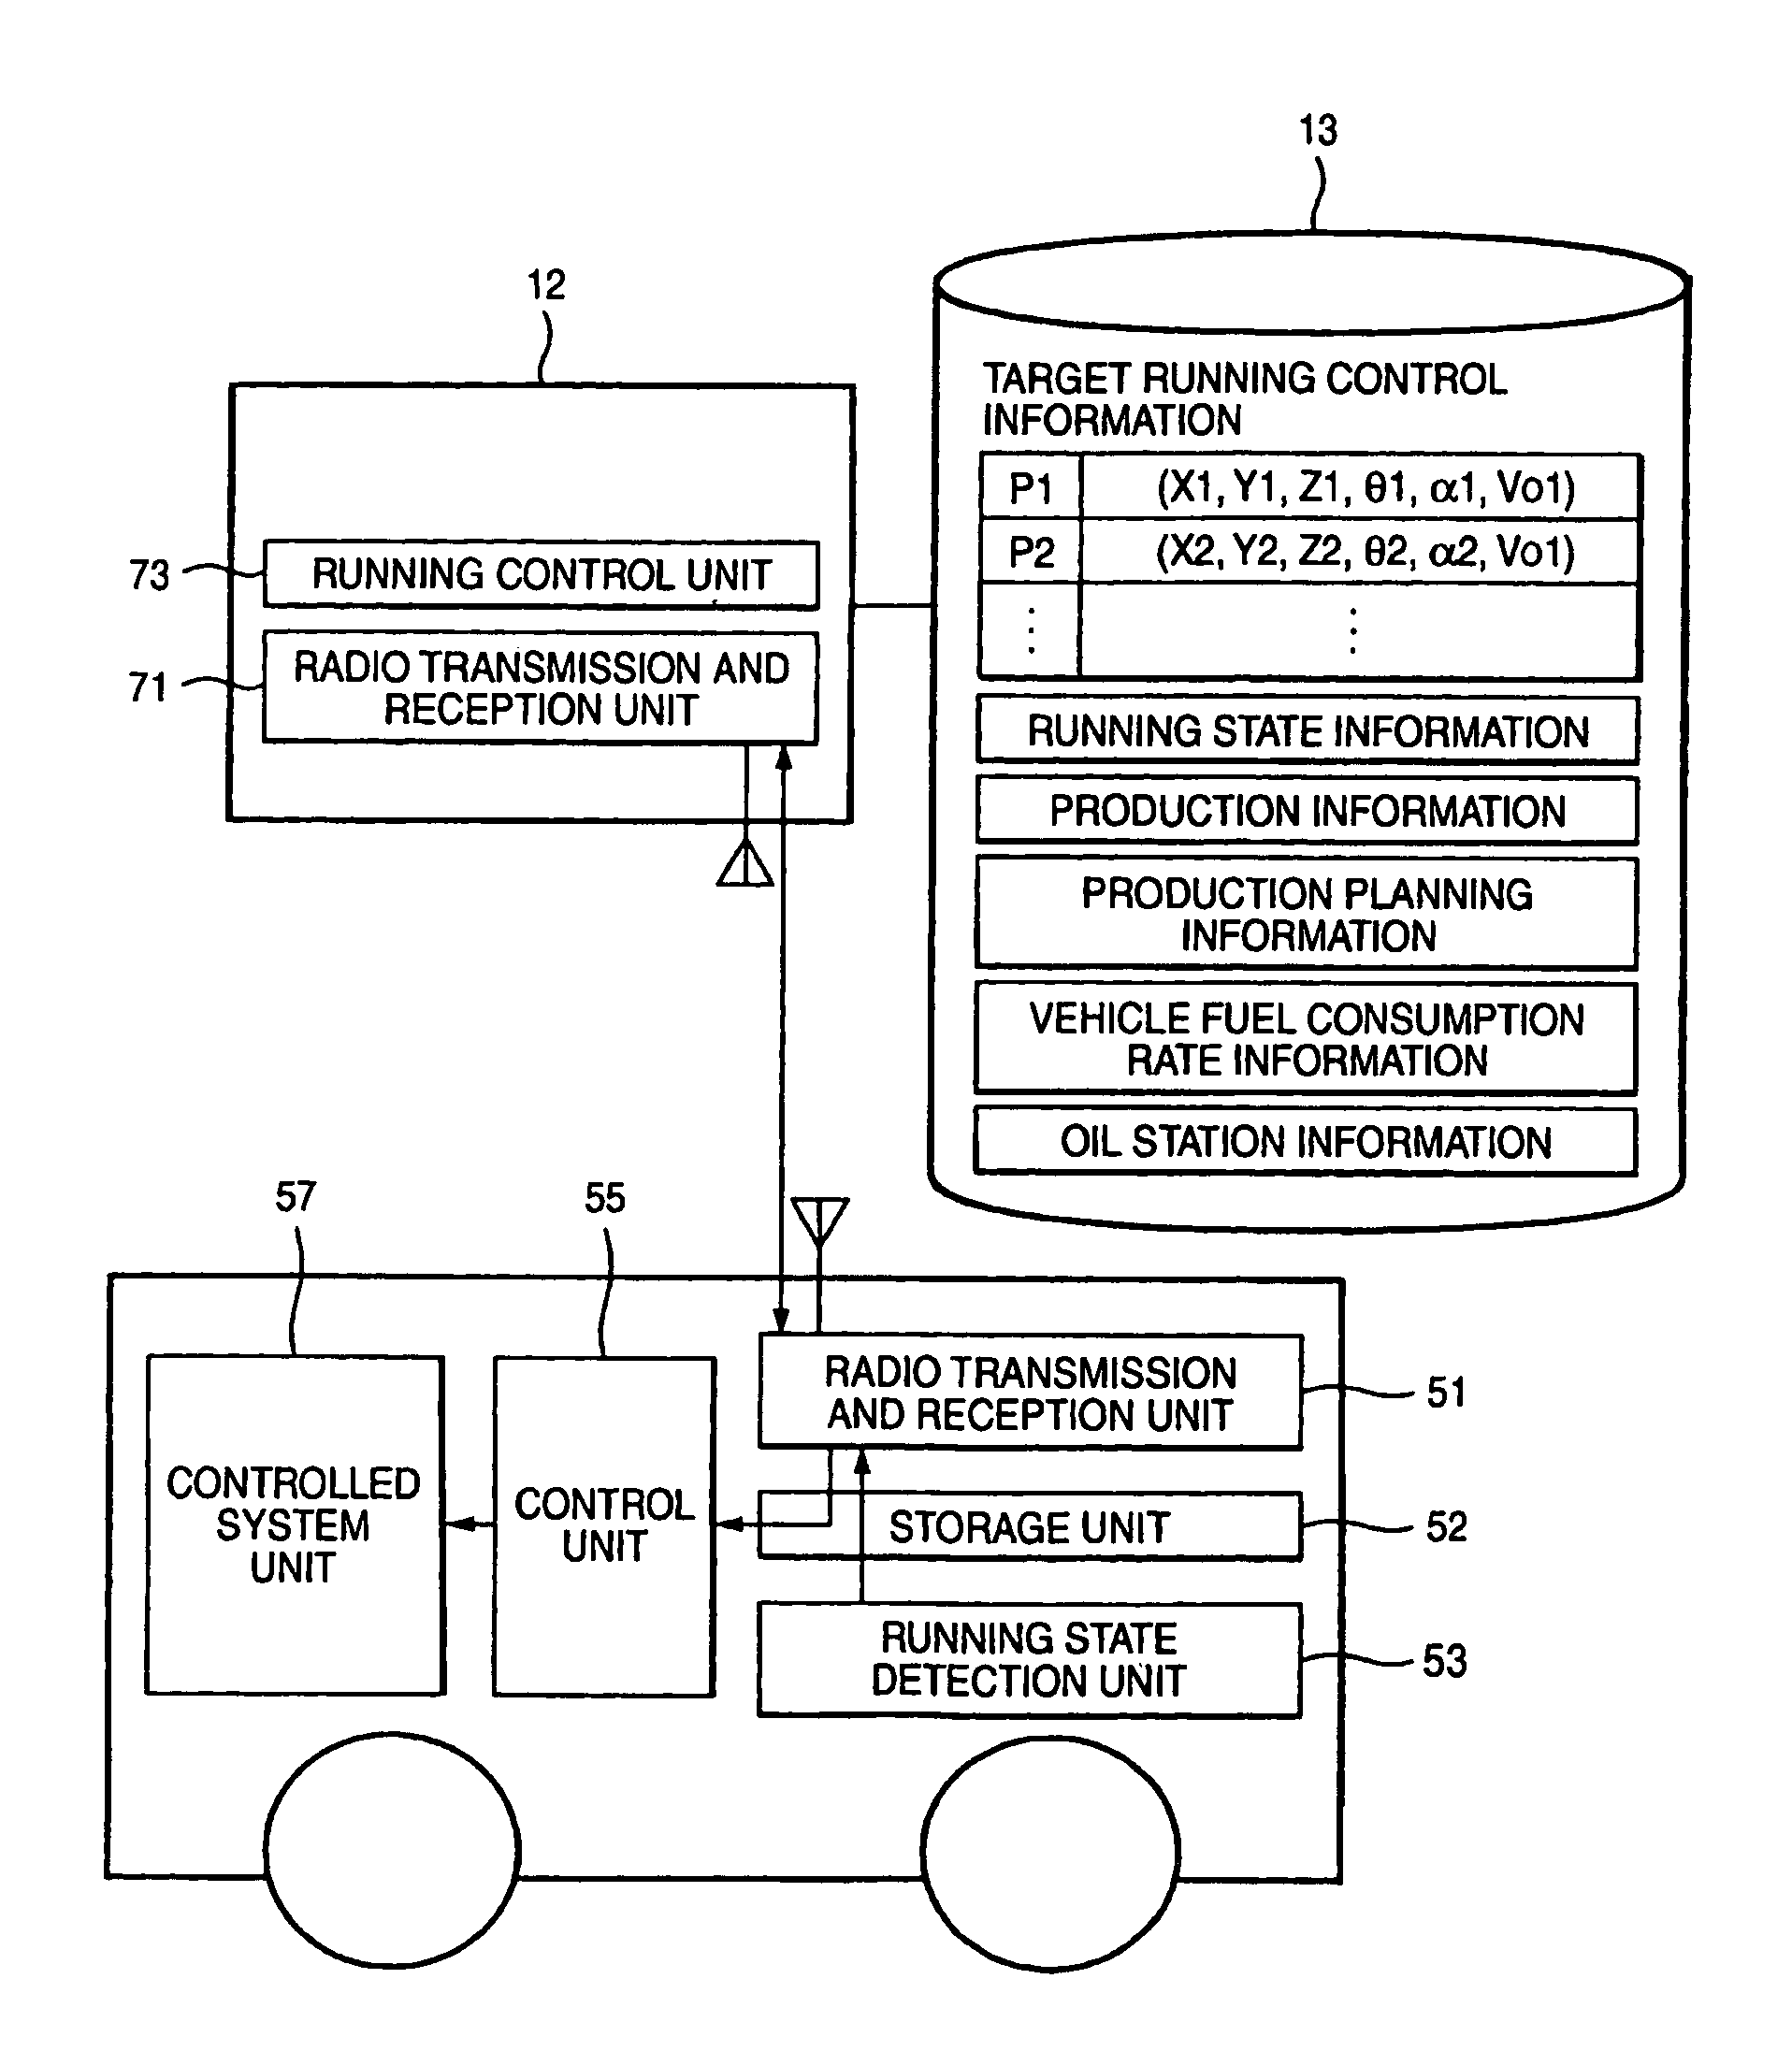 Maintenance scheduling apparatus and method therefor